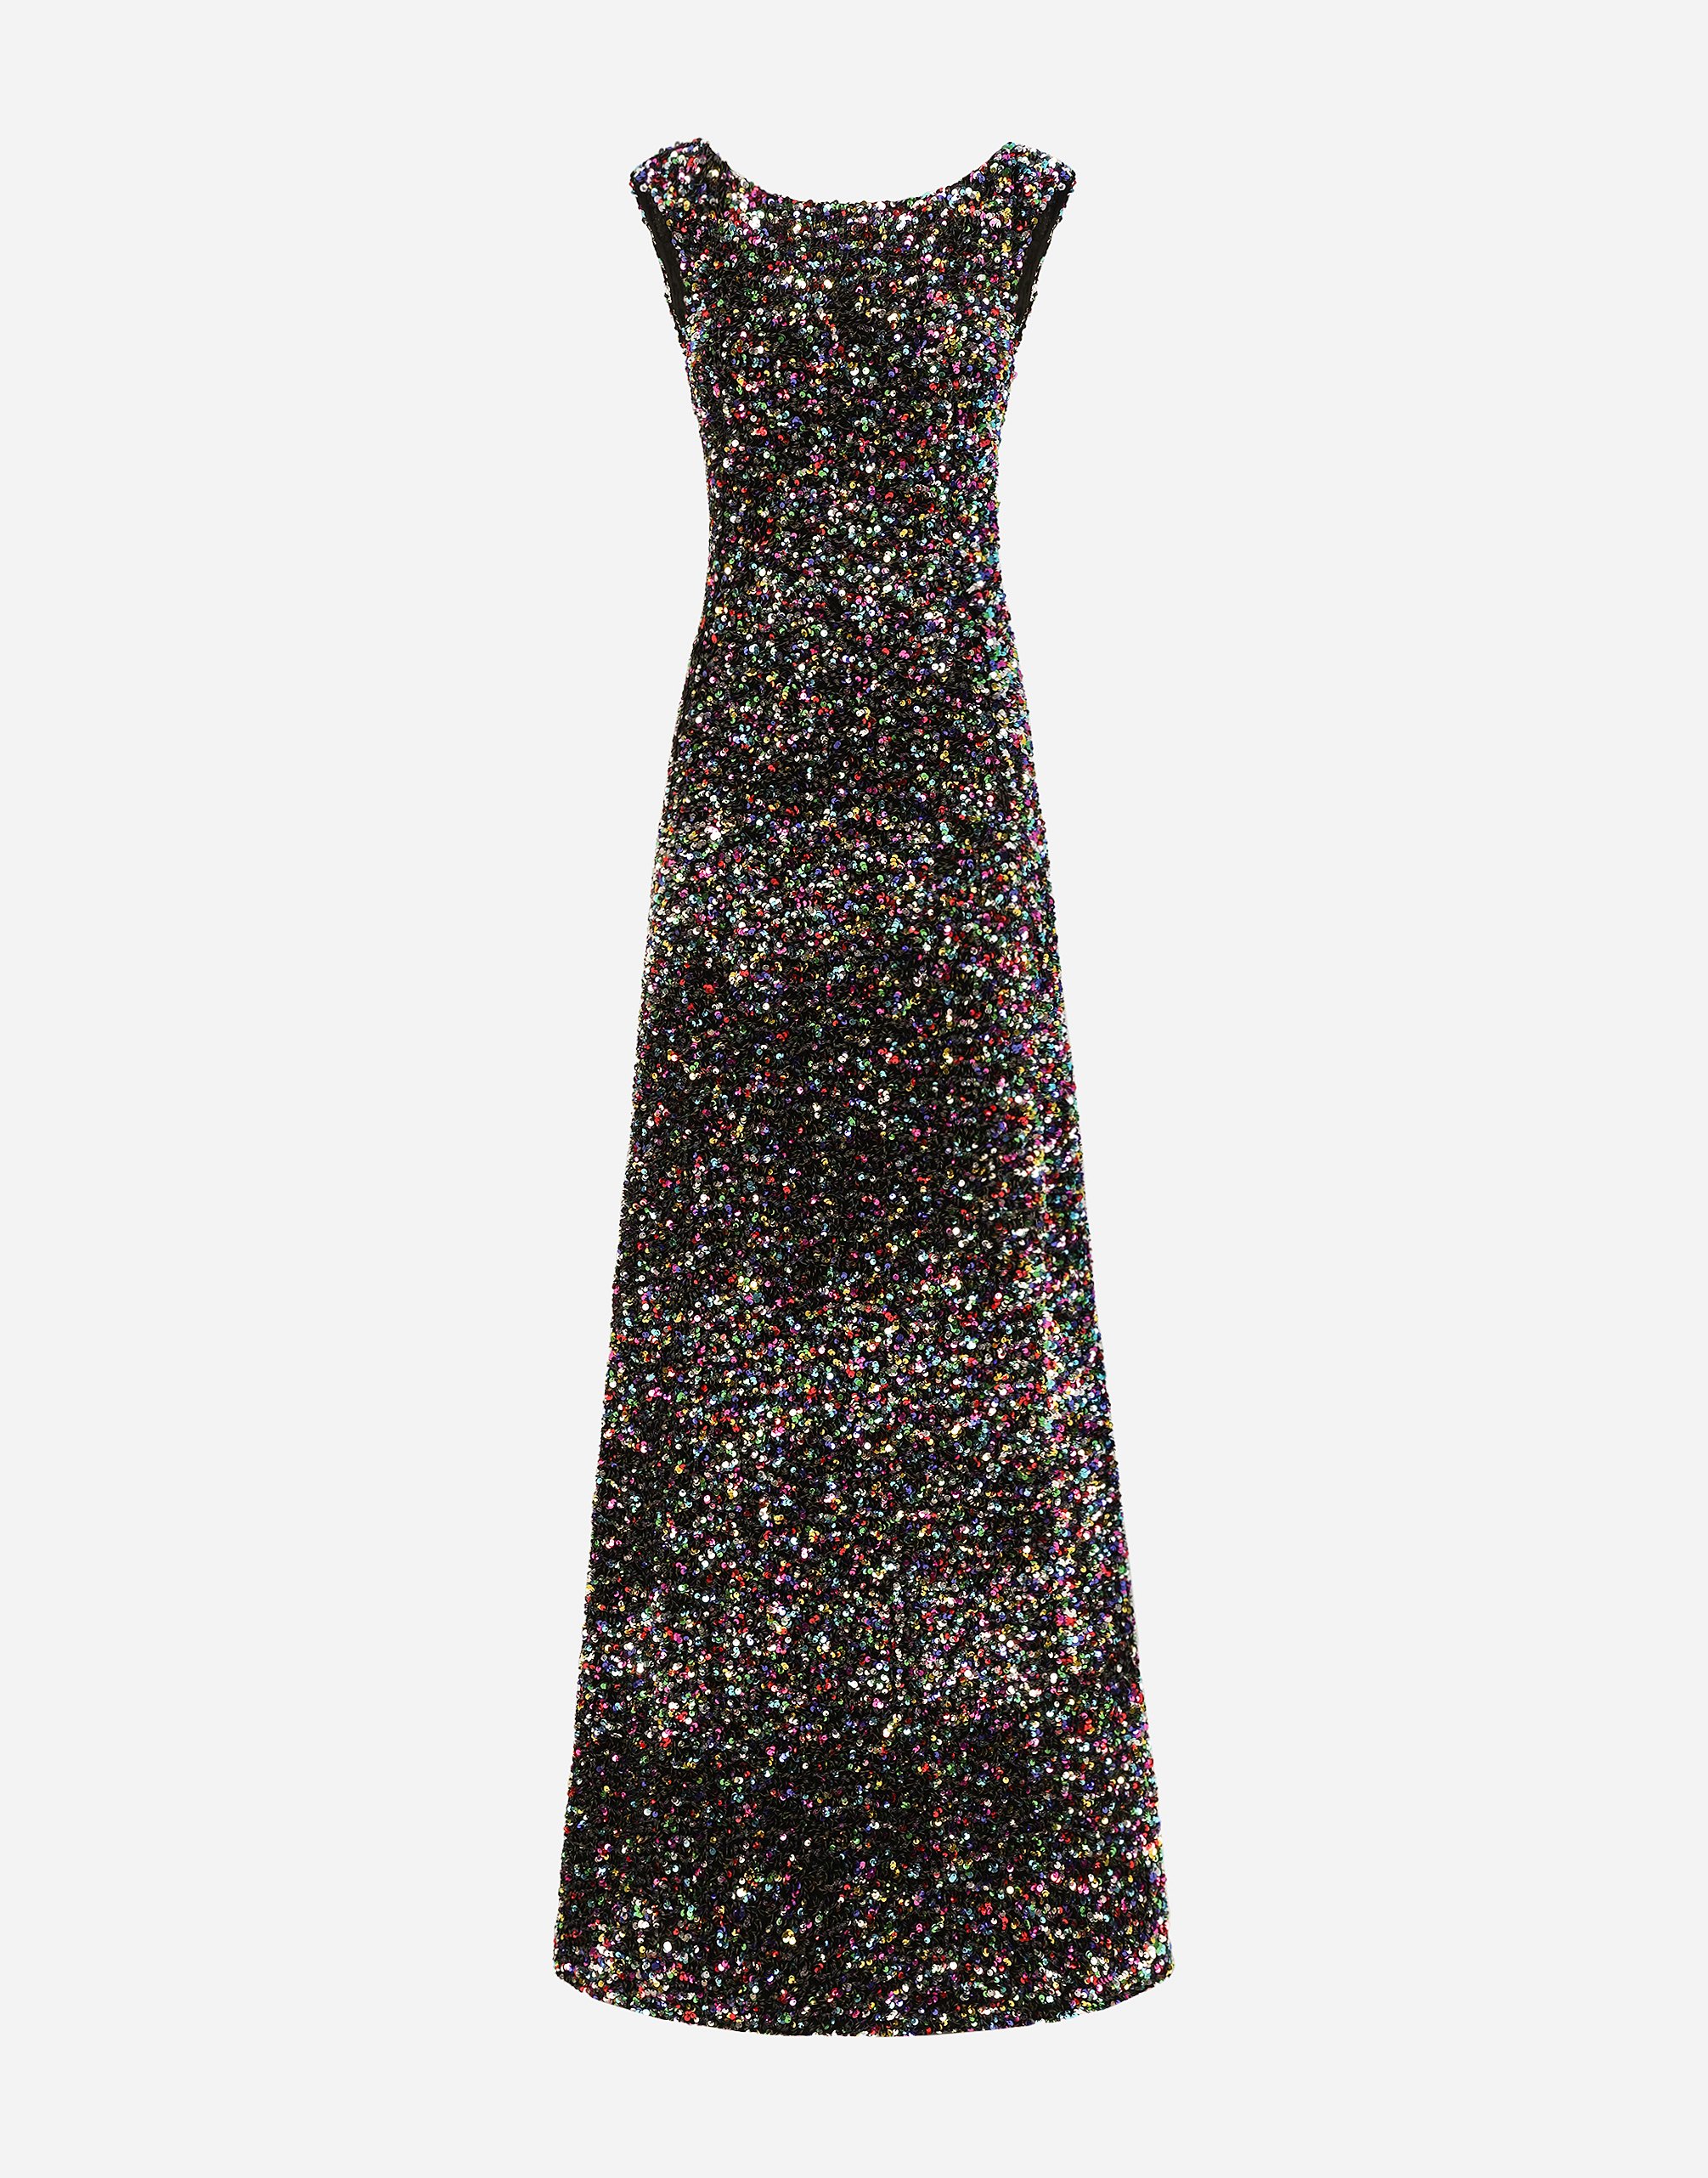 Long multi-colored sequined dress in Multicolor